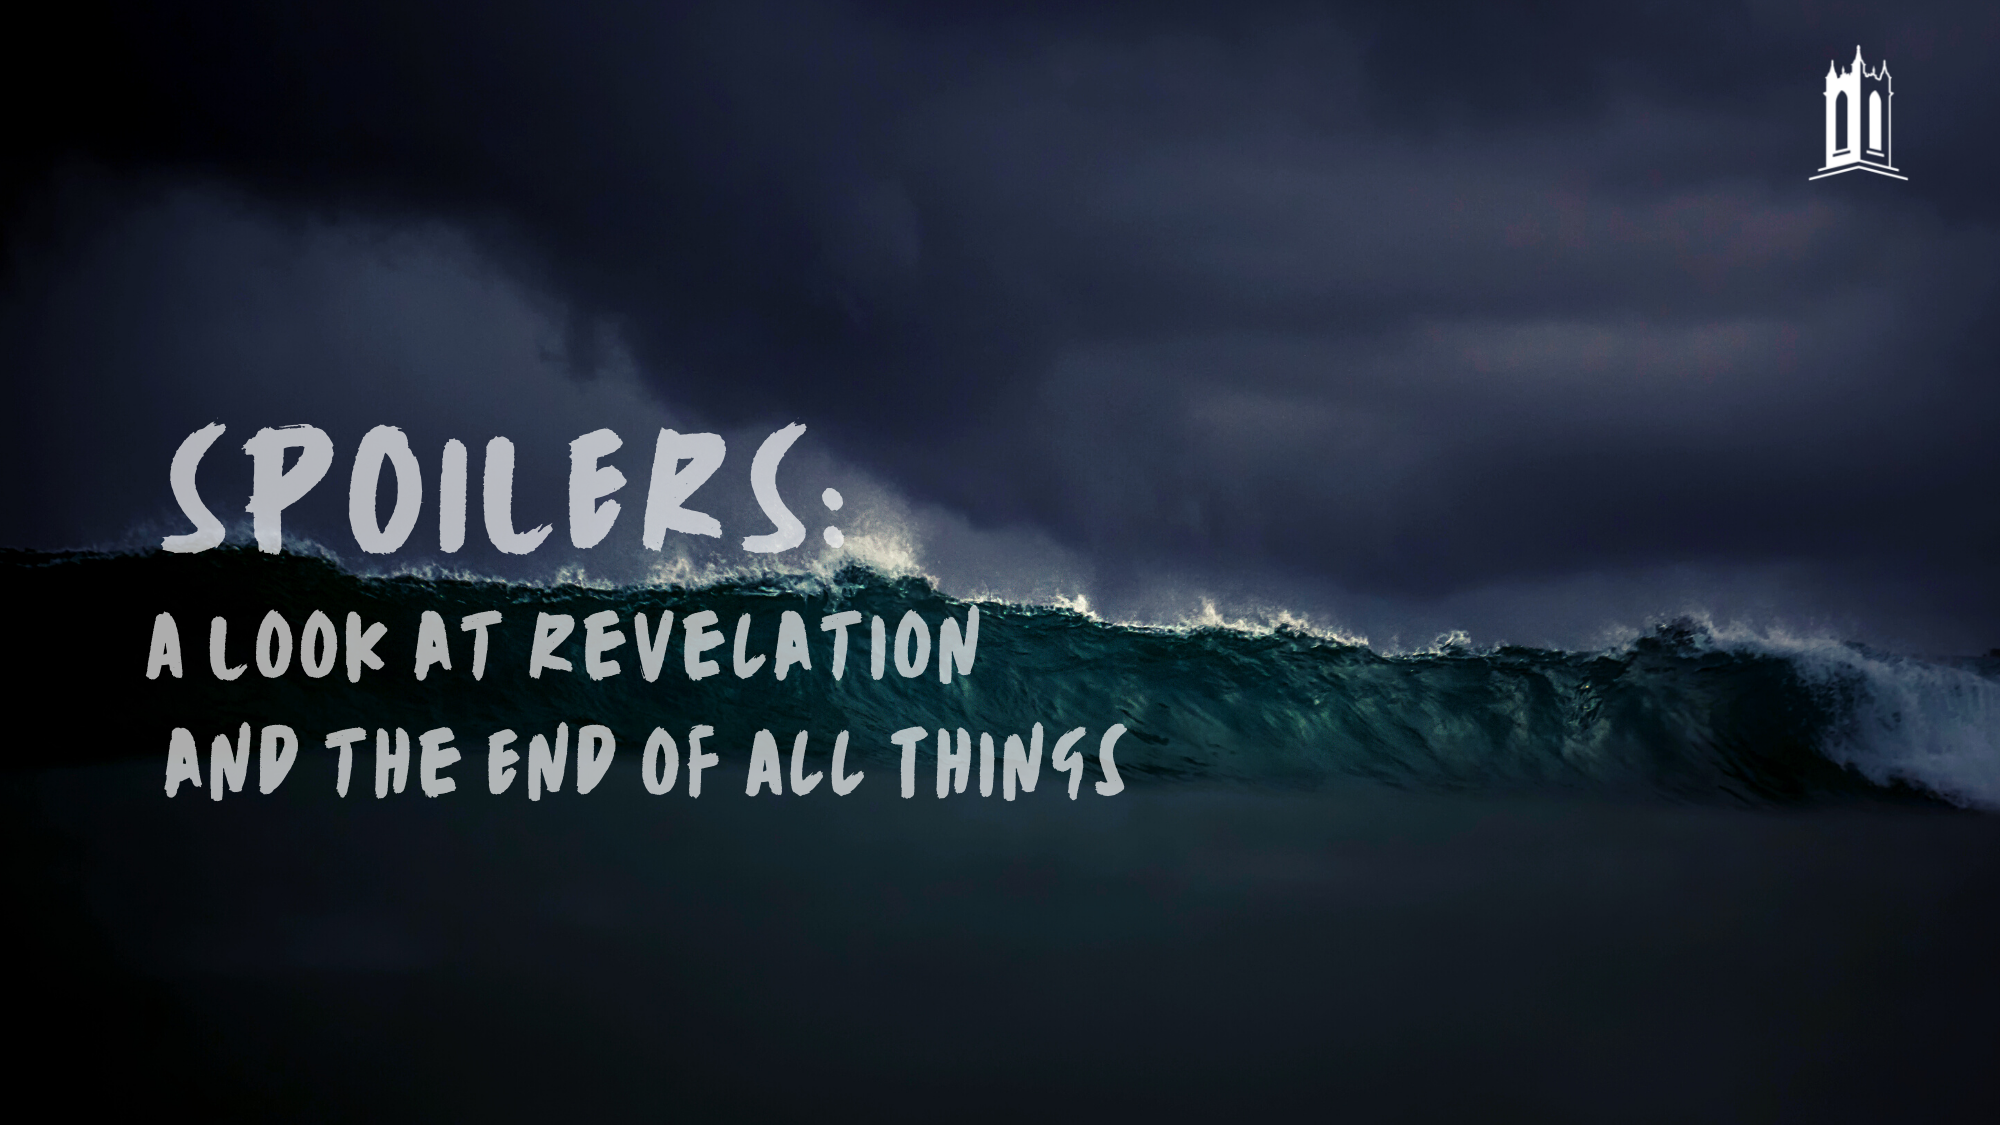 Spoilers: A Look at Revelation and the End of All Things